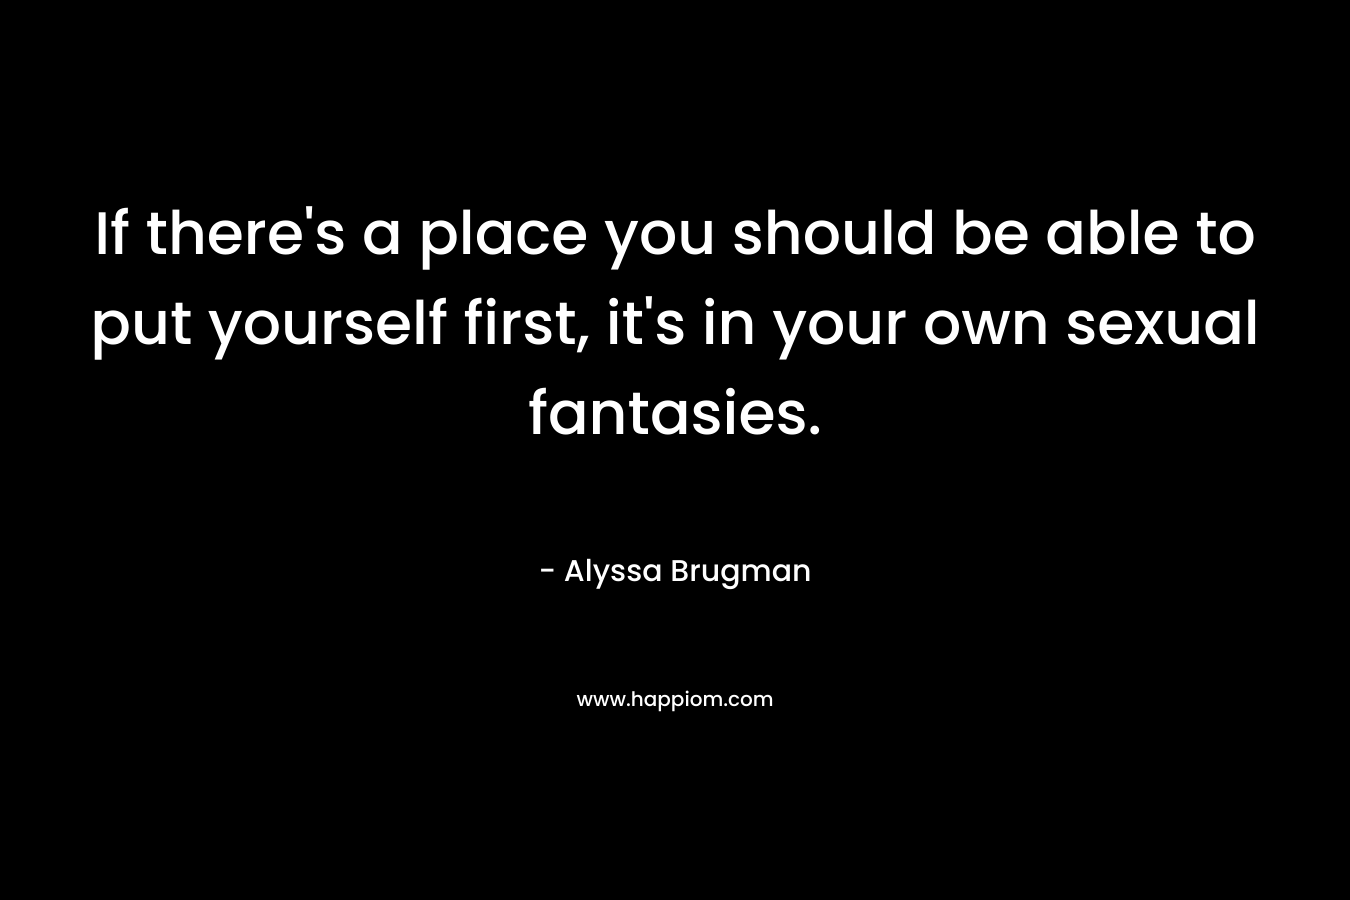 If there’s a place you should be able to put yourself first, it’s in your own sexual fantasies. – Alyssa Brugman